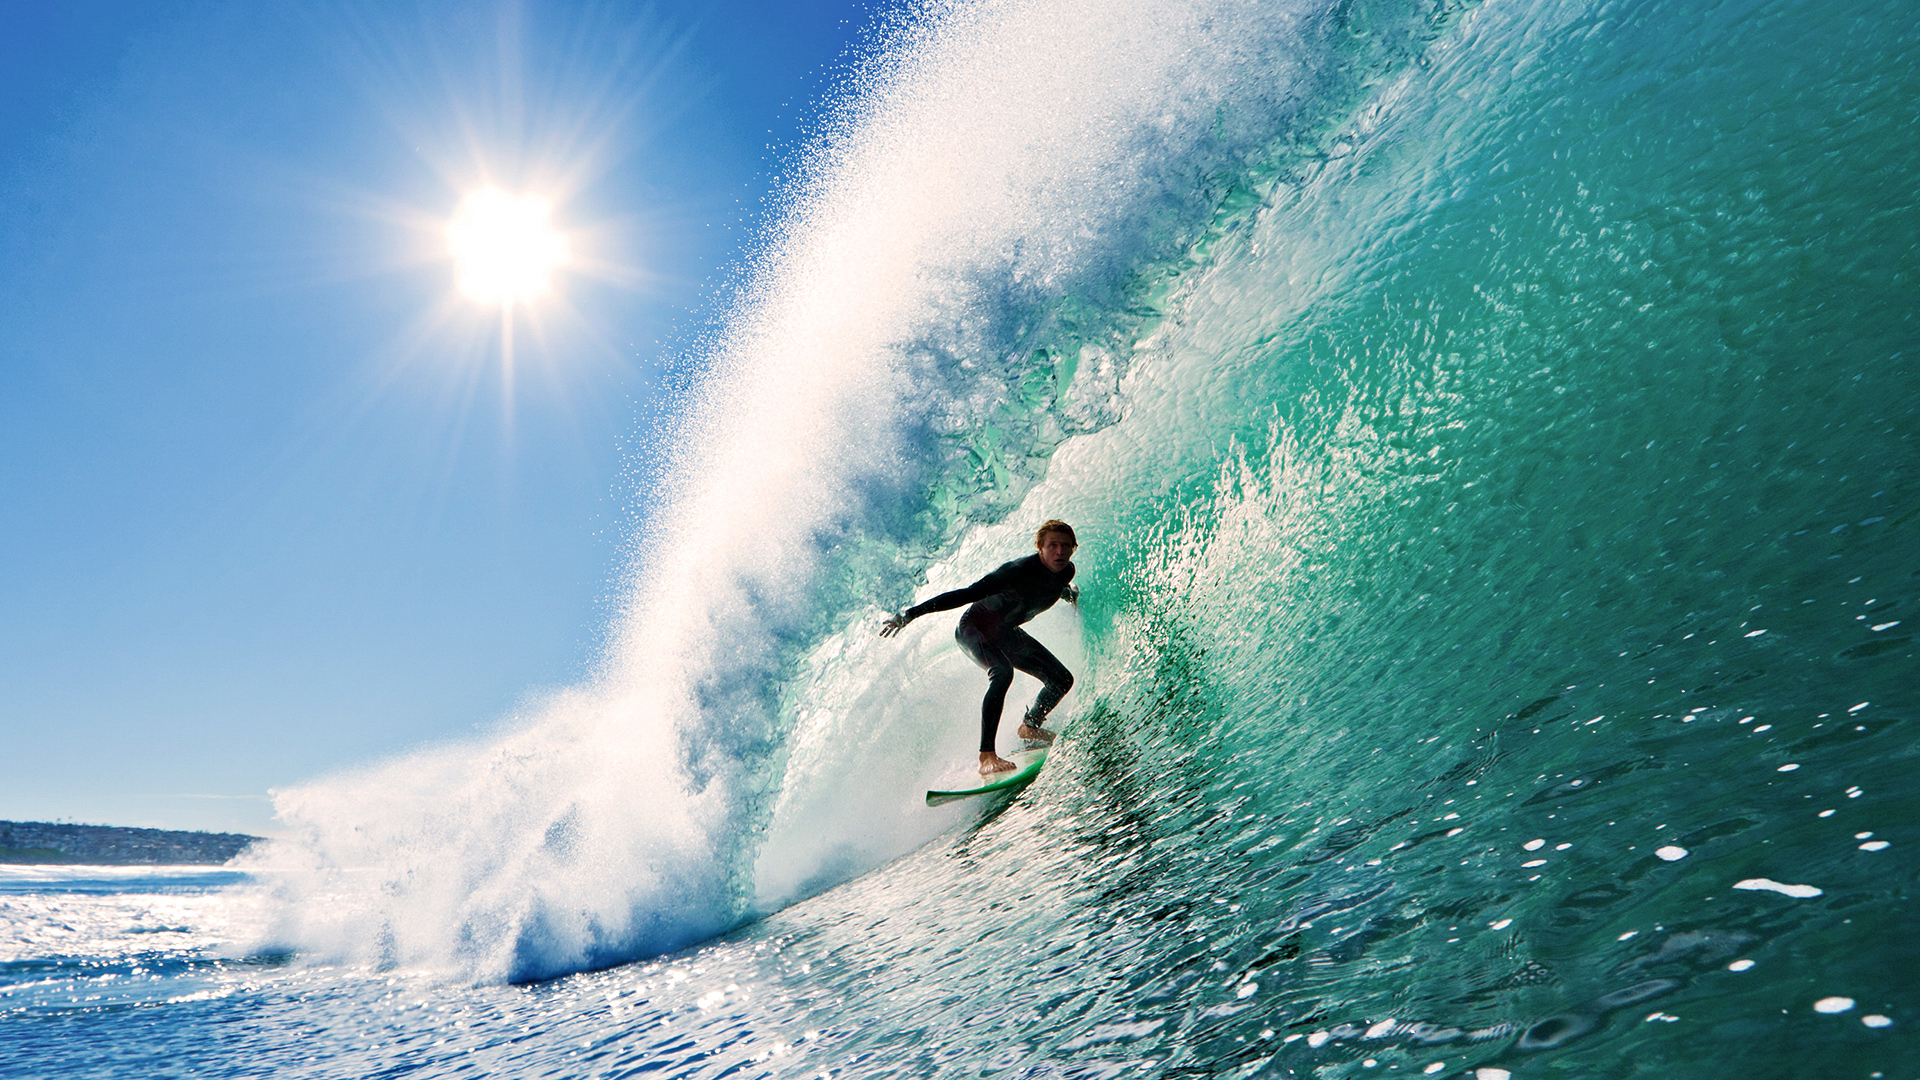 Surfing HD Wallpaper High Definition Quality